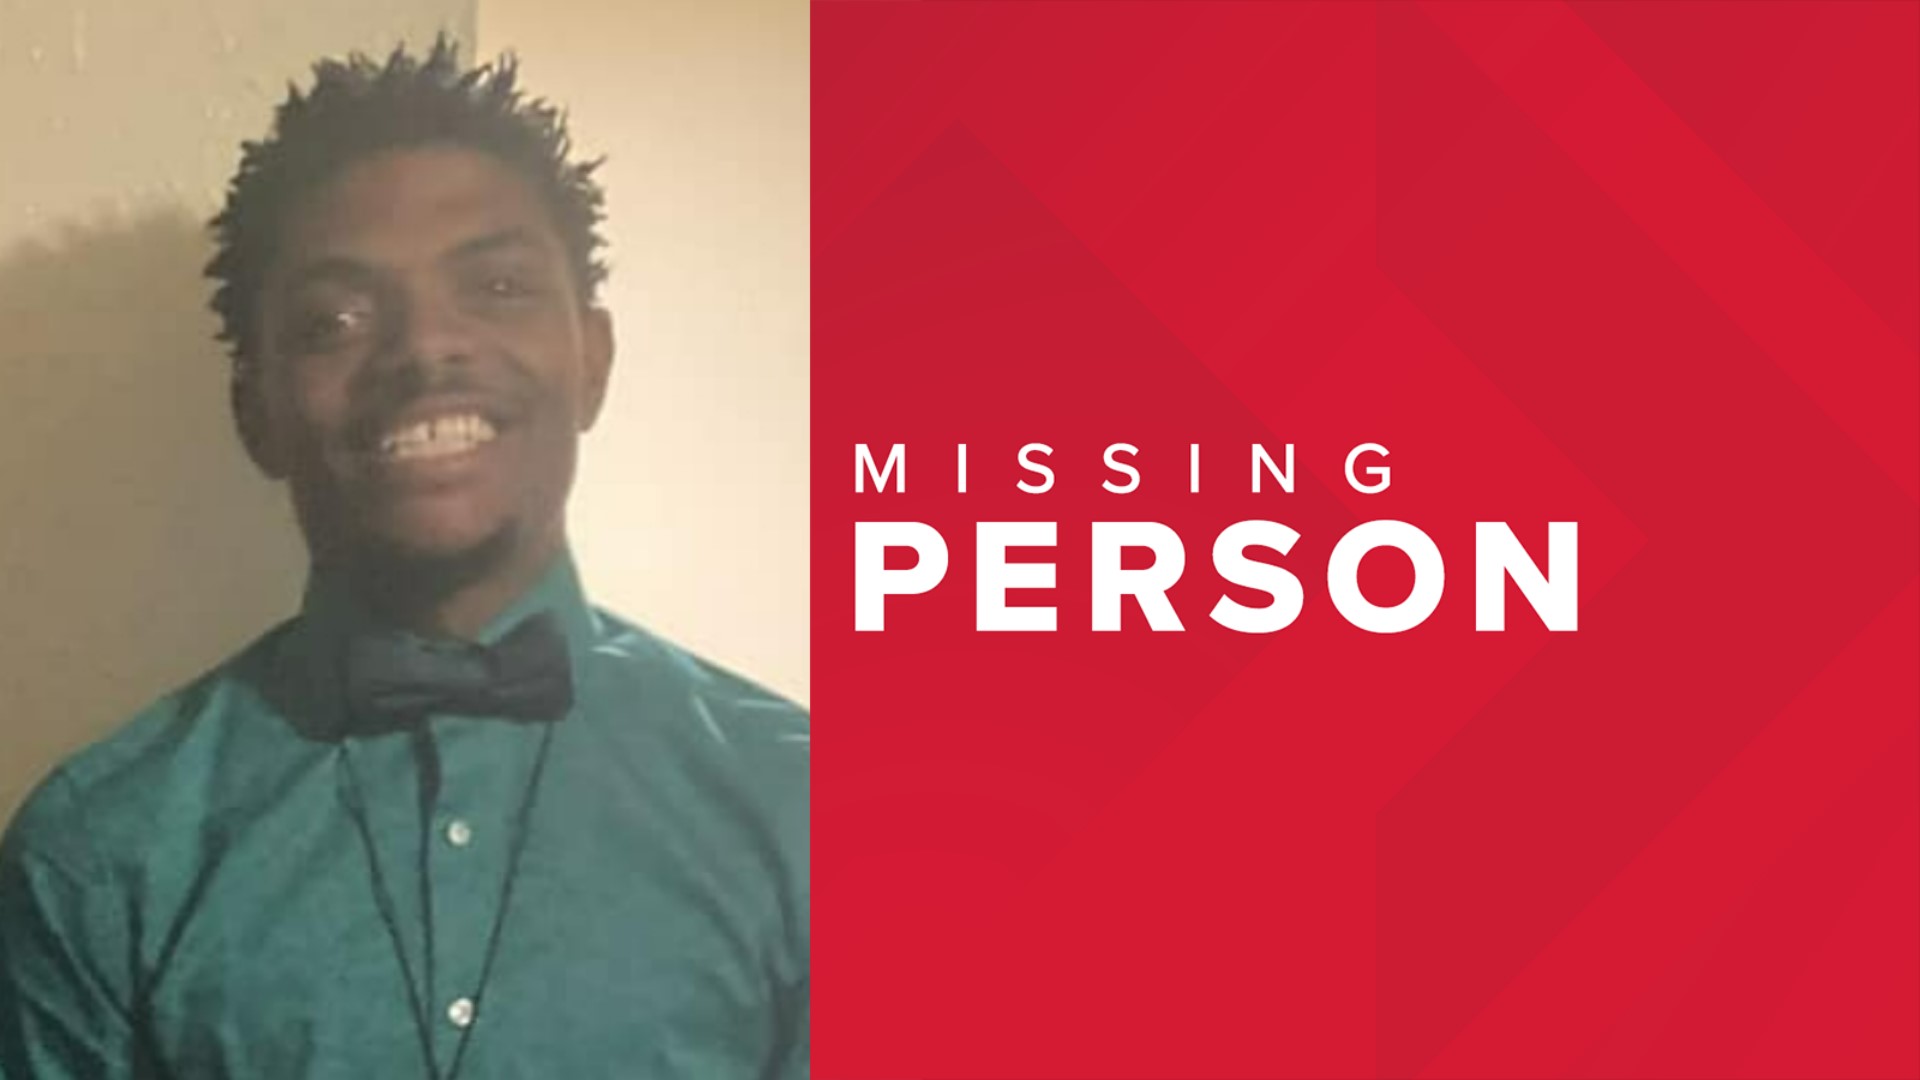 Authorities say Malik Johnson, 24, was last seen Thursday wearing no shirt and blue and orange shorts. They say he has a condition that requires medication.